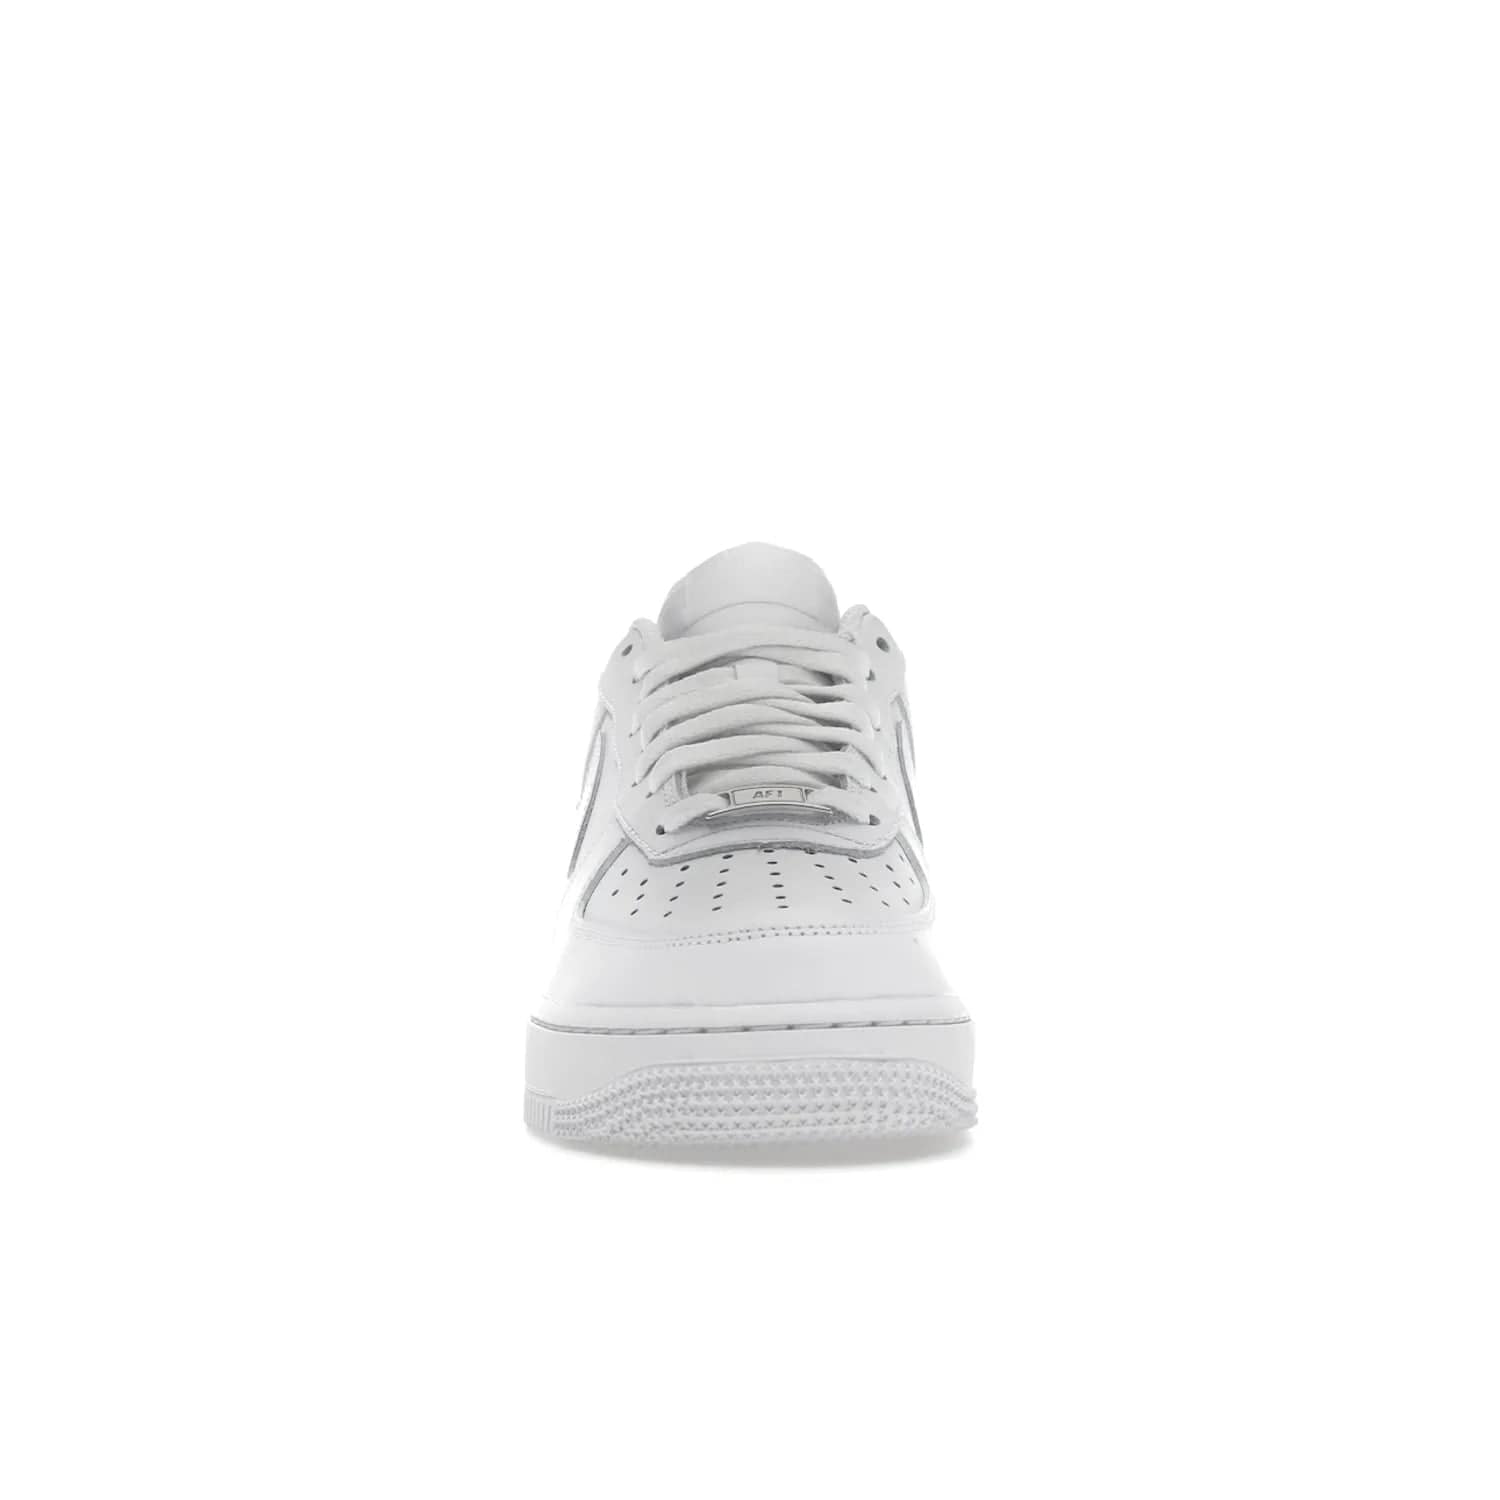 Nike Air Force 1 Low '07 White (Women's) - Image 10 - Only at www.BallersClubKickz.com - Timeless classic sneaker updated with white leather upper and perforated toe box. Nike heel embroidery and white sole. Released January 2018.